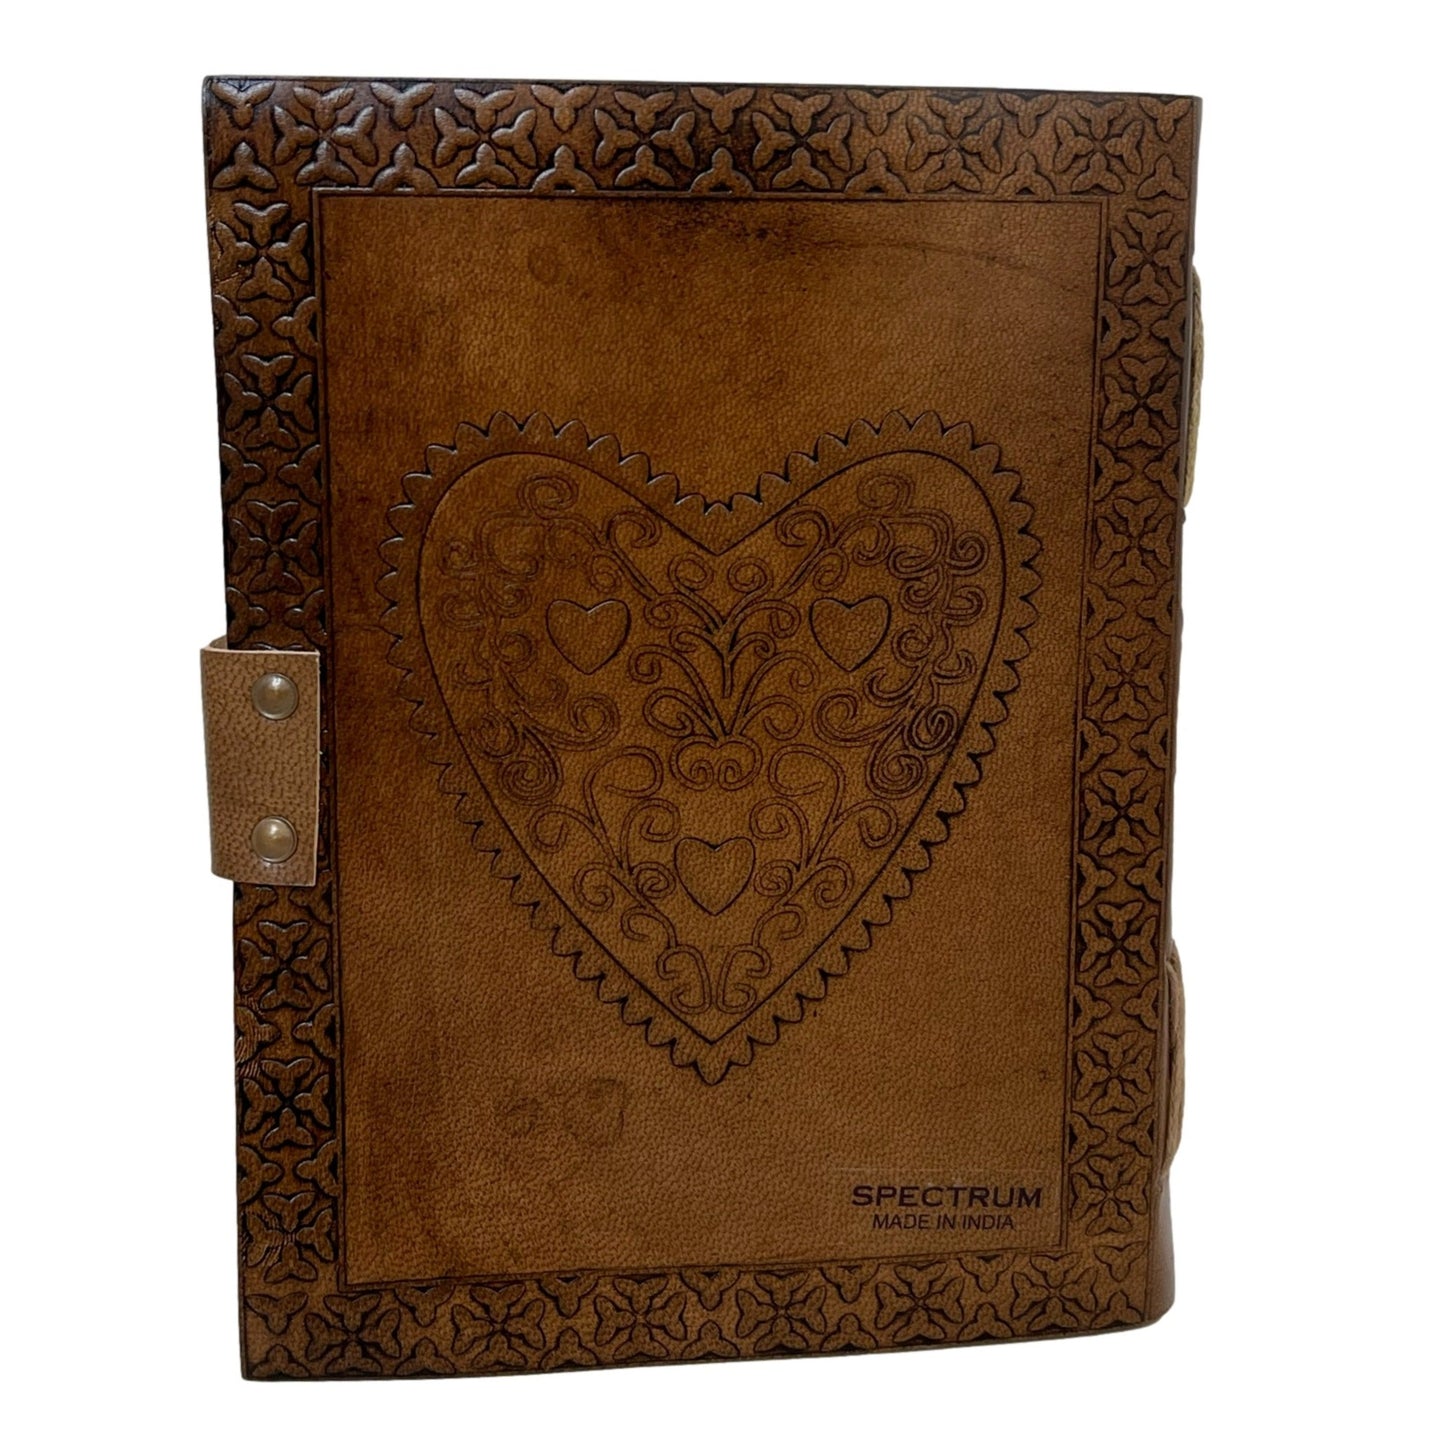 100% Leather Journal Embossed with an Owl